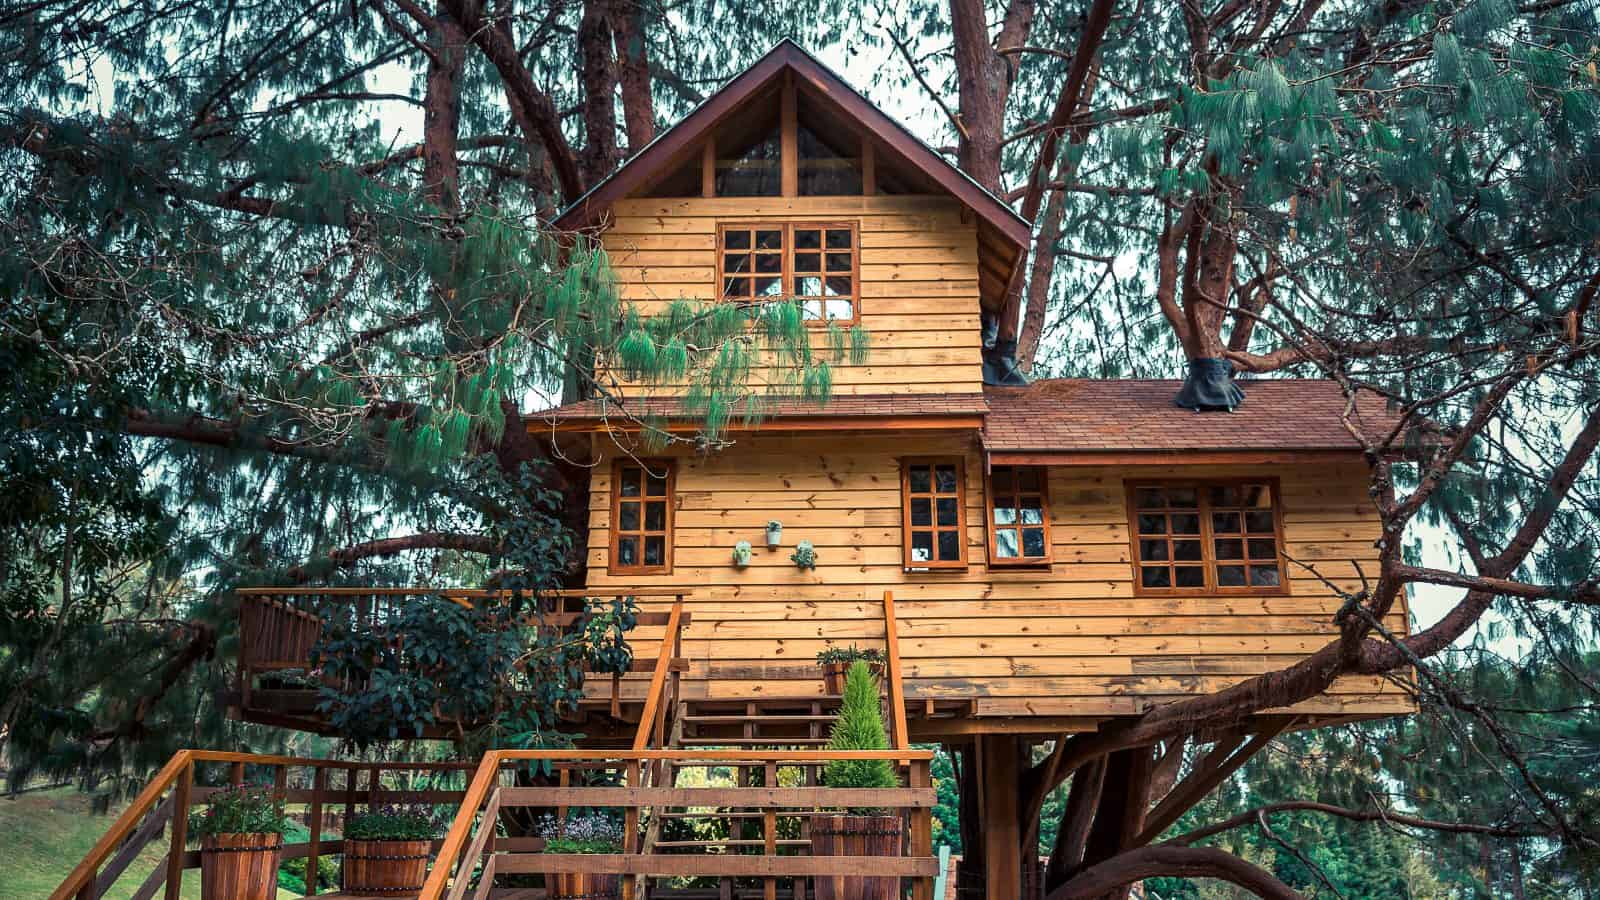 A beautiful treehouse sits in the woods.